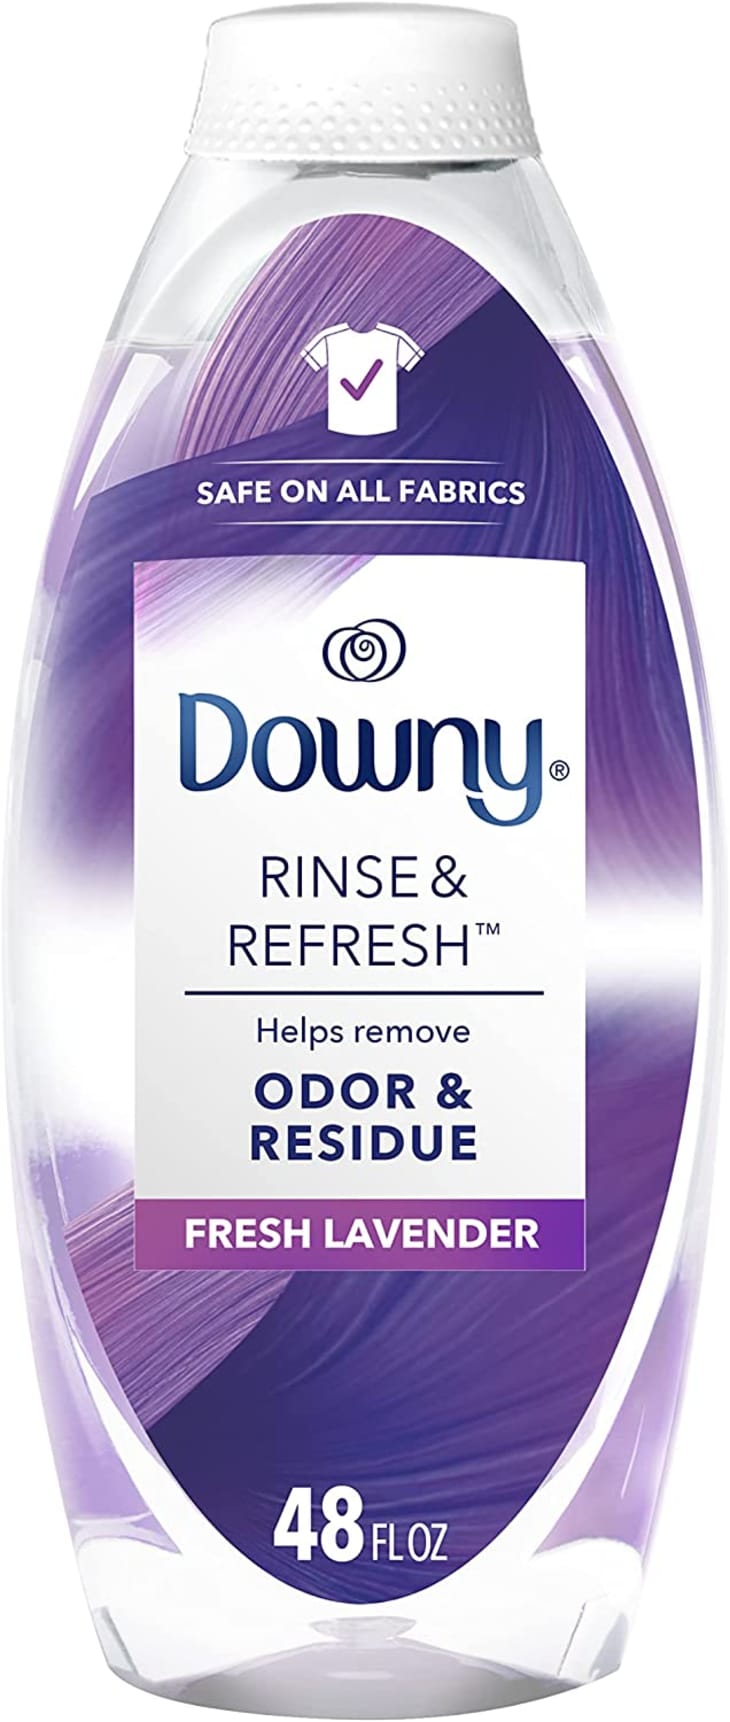 Product Image: Downy Rinse & Refresh Laundry Odor Remover And Fabric Softener in Fresh Lavender